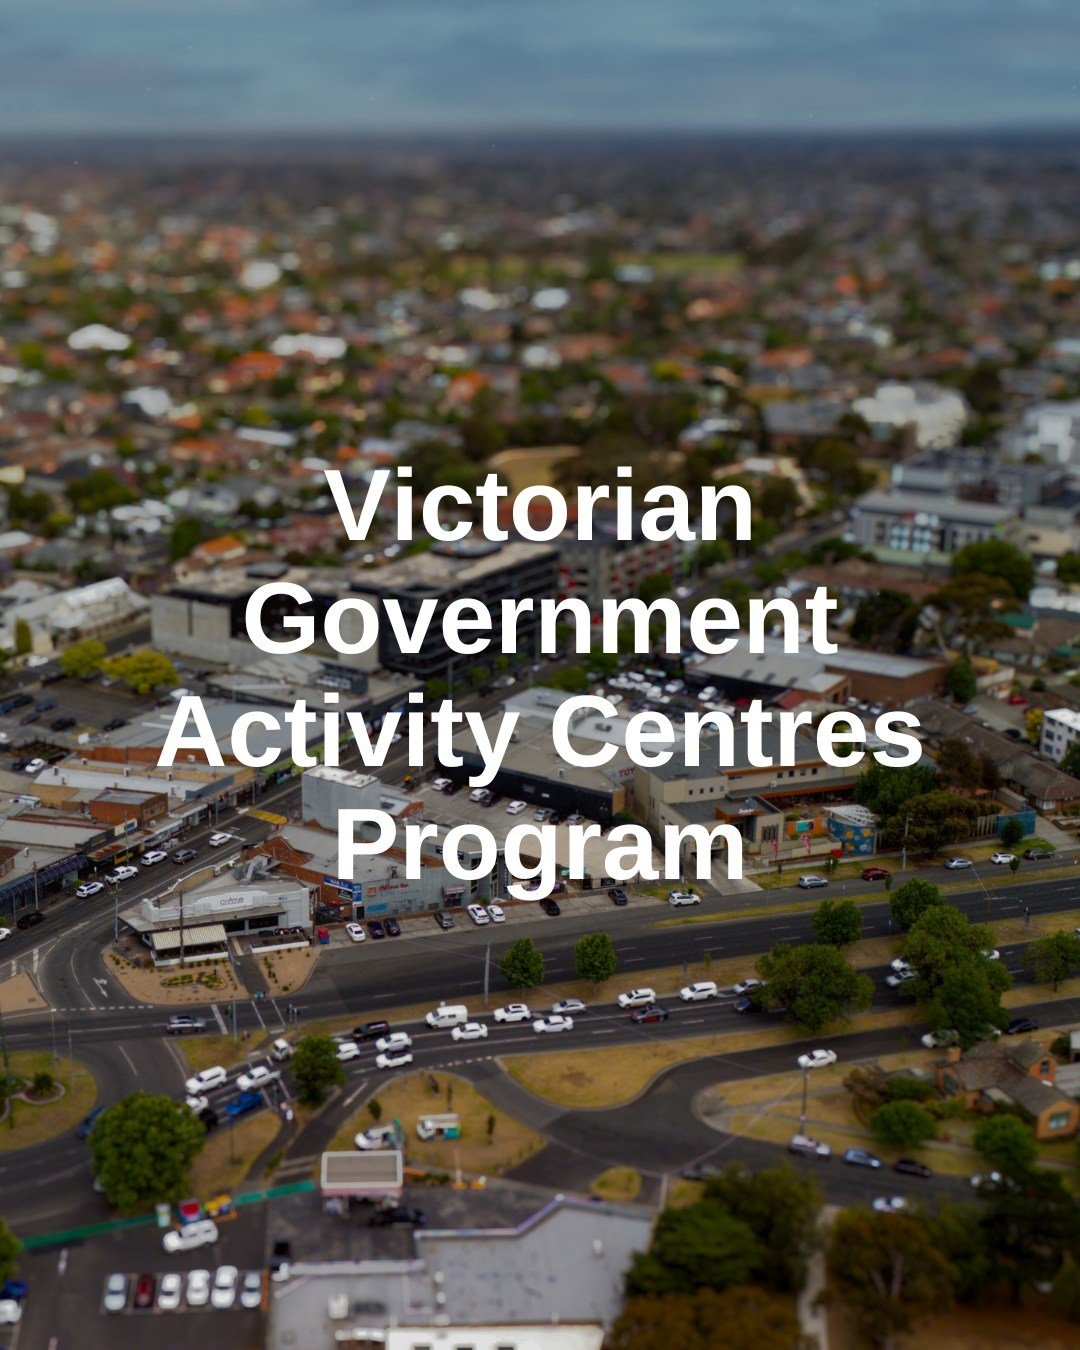 We're delighted to announce our collaboration with the Department of Transport and Planning, Victorian Planning Authority, McGregor Coxall and Hansen Partnership to tackle the housing needs of Victoria's population boom which is expected to match Lon